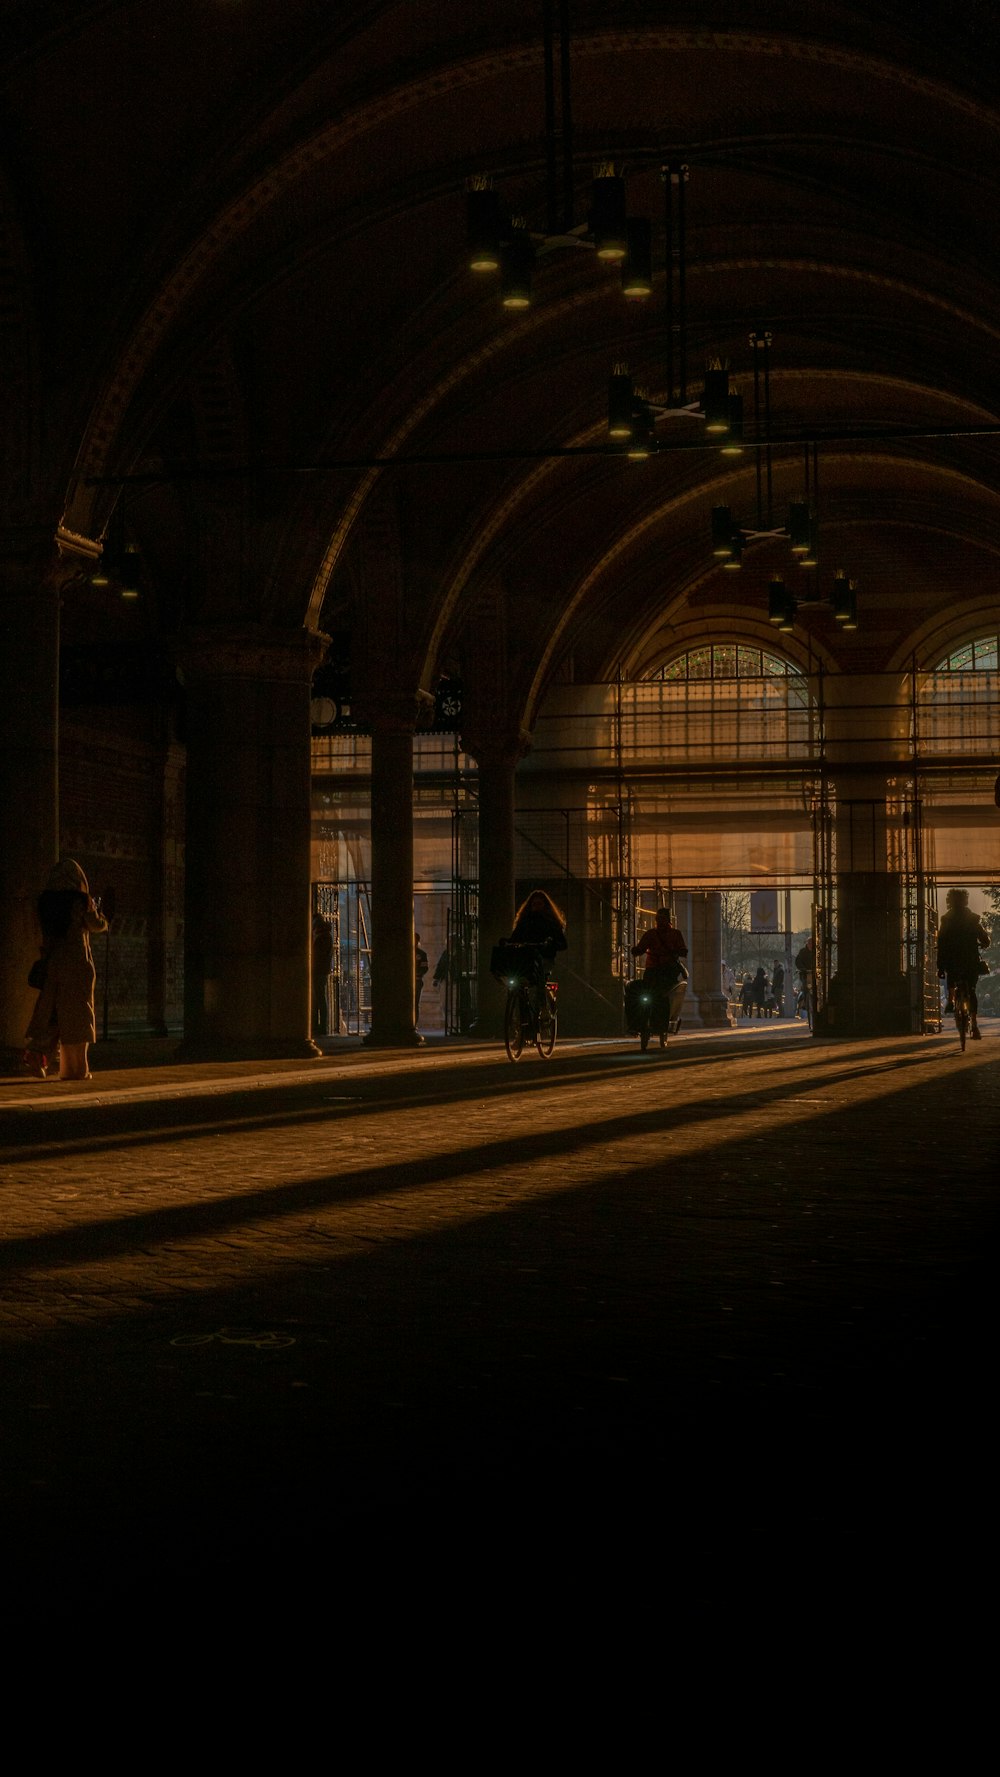 a group of people walking through a train station